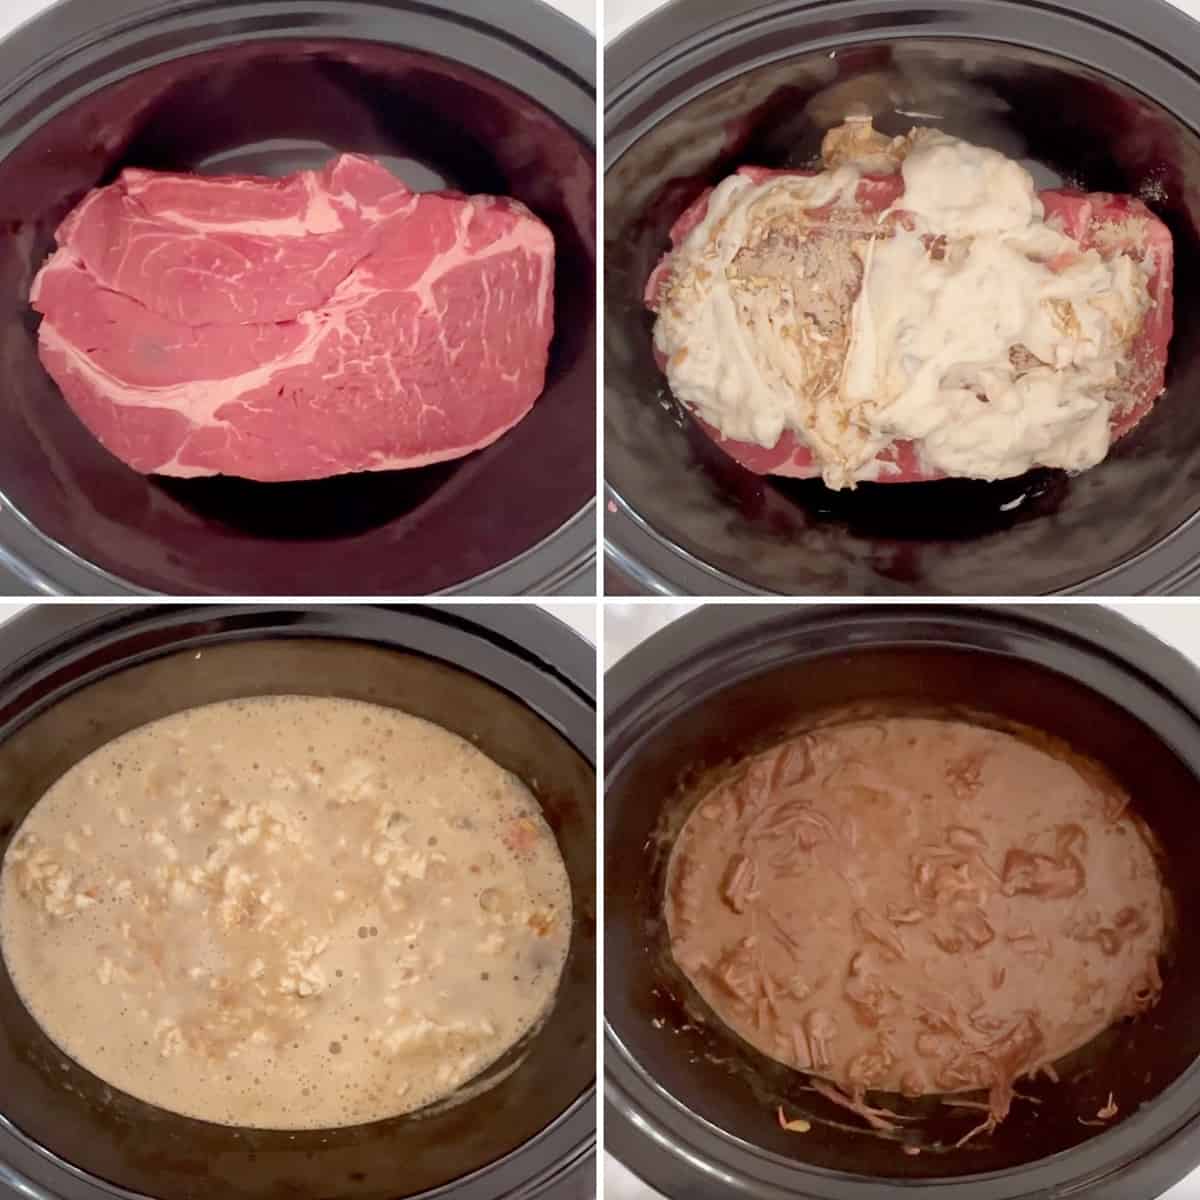 4 photos showing the process of making pot roast in a slow cooker